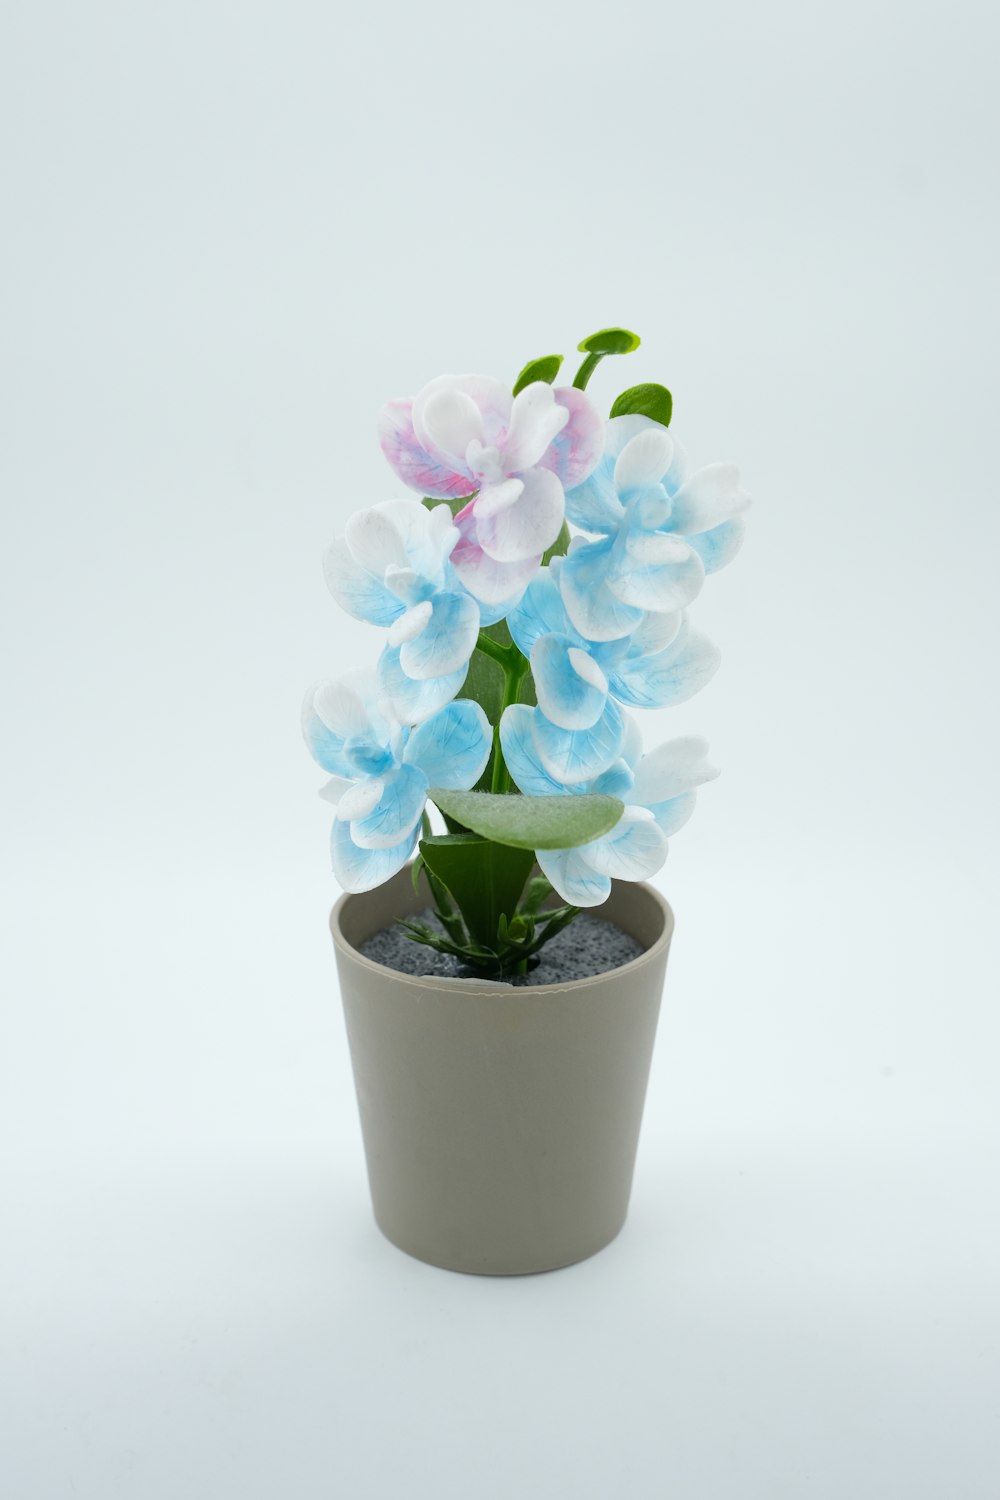 a small potted plant with blue and pink flowers